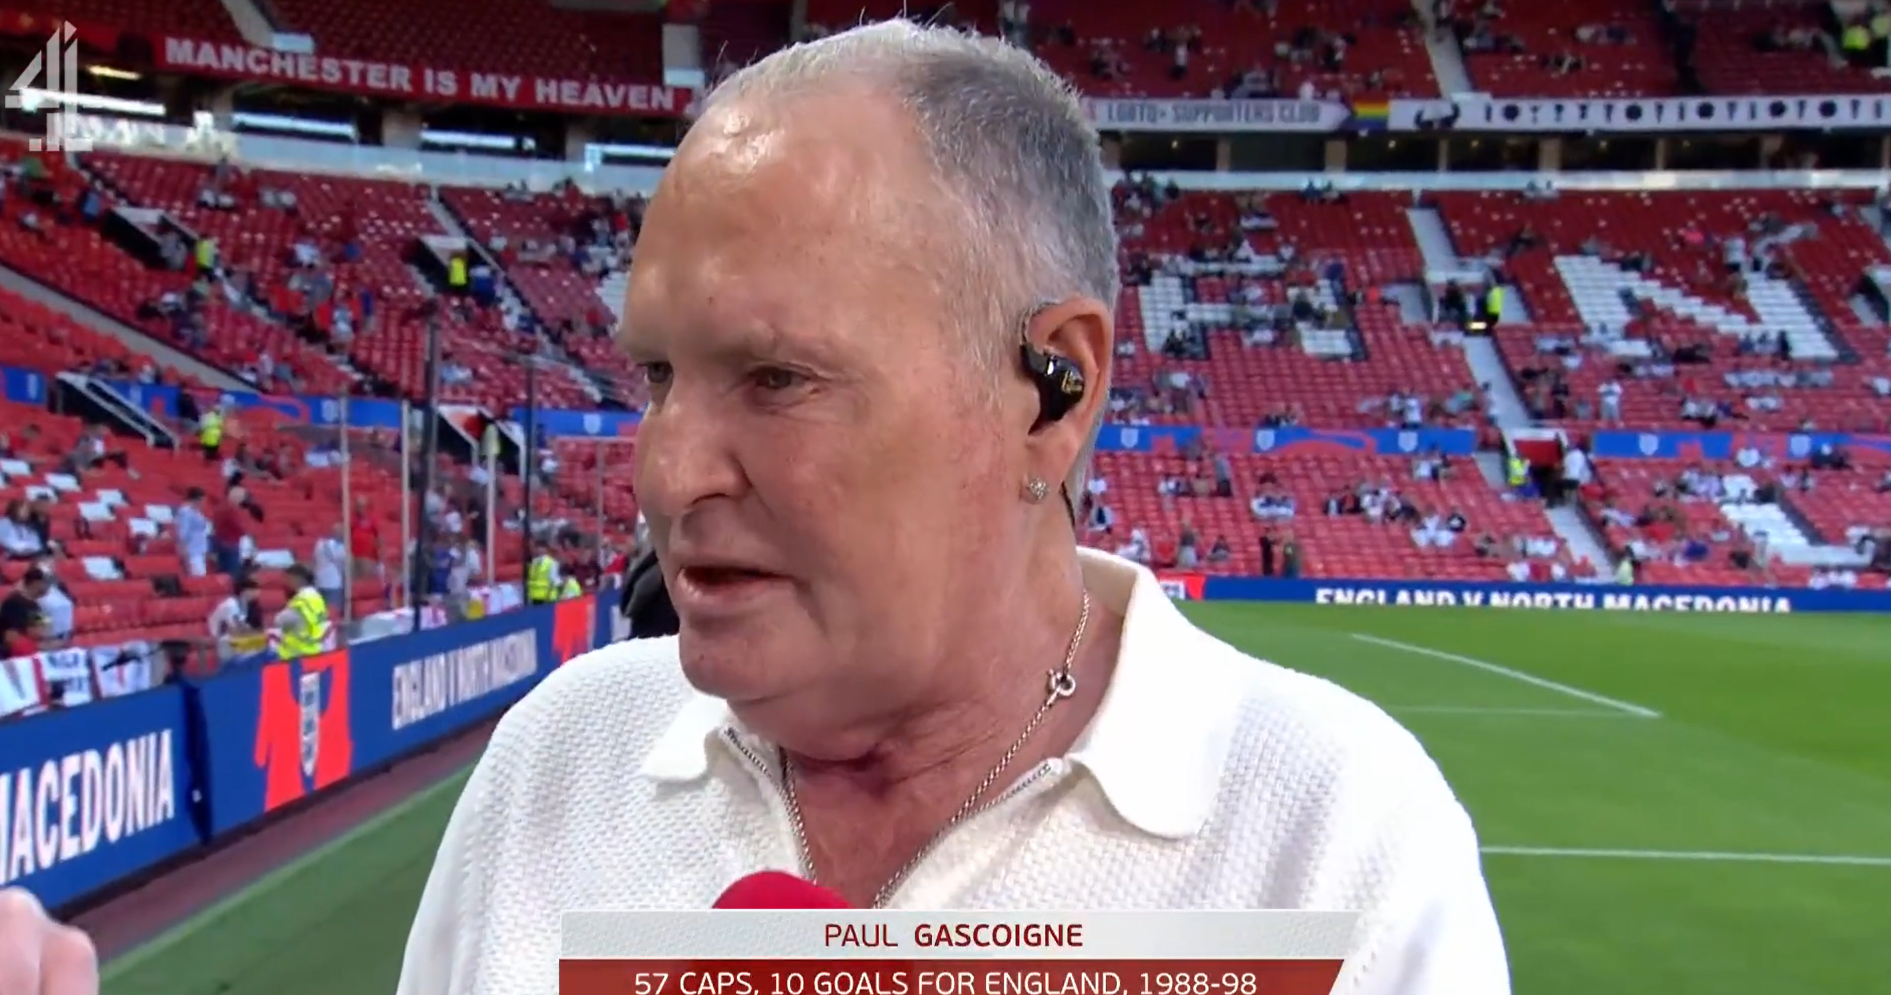 Paul Gascoigne seen shaking during interview with Channel 4 as fans say it shouldn't have been broadcast